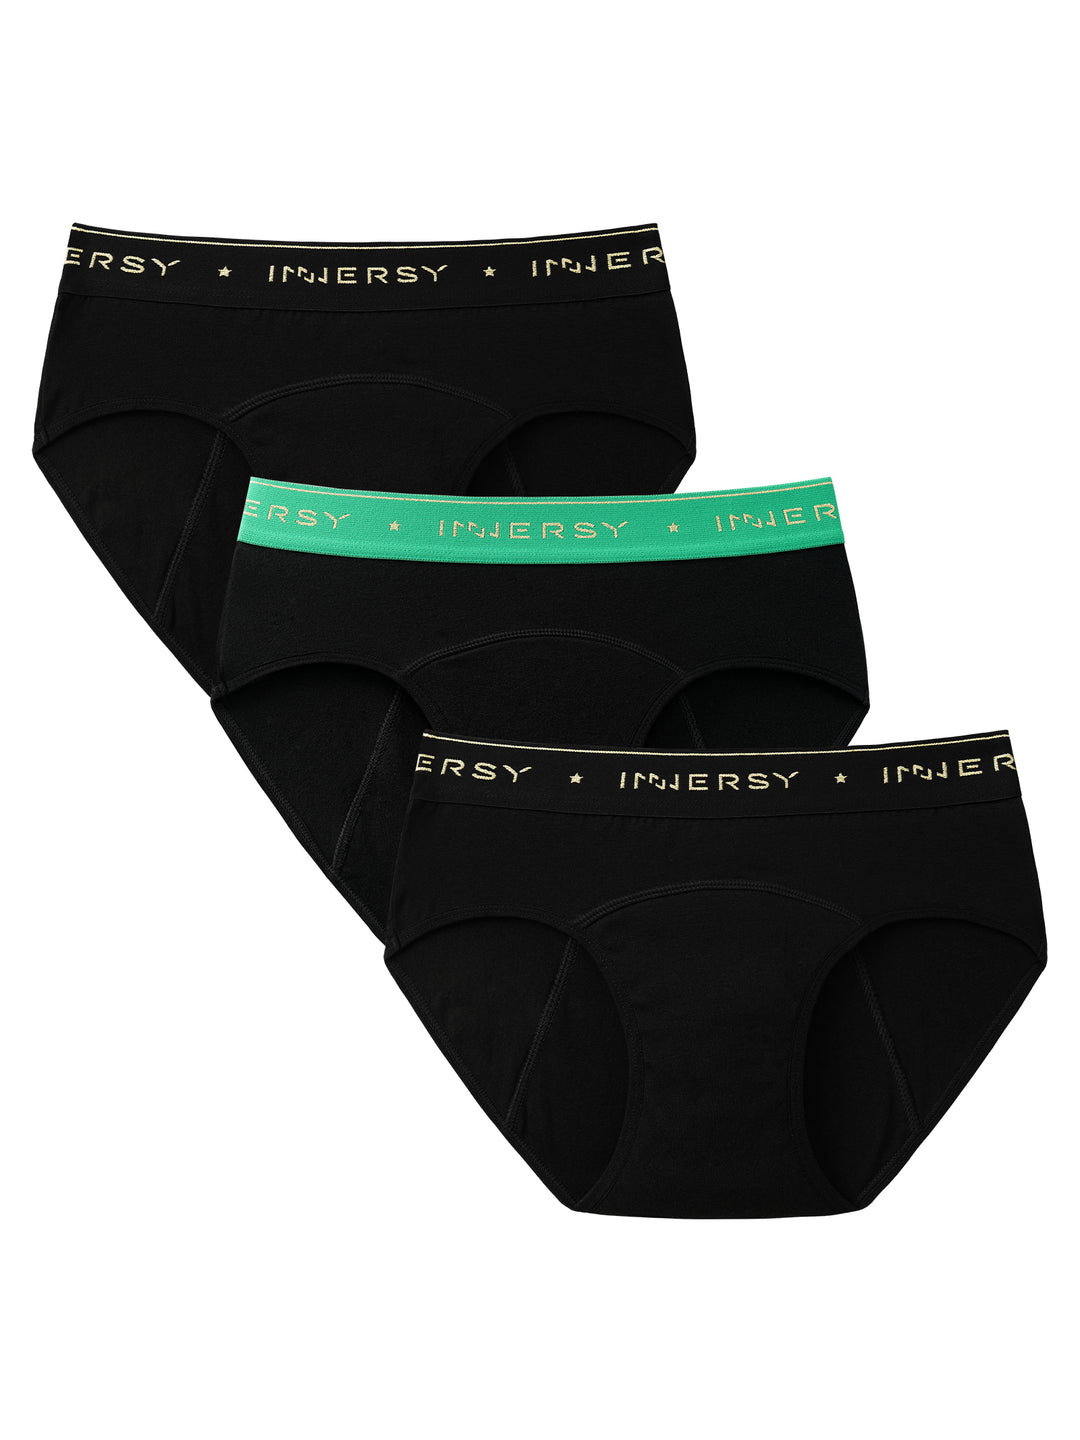 INNERSY Underwear for Teen Girls Soft Cotton Briefs Mid- Rise Panties  6-Pack（S(8-10 yrs), Black)